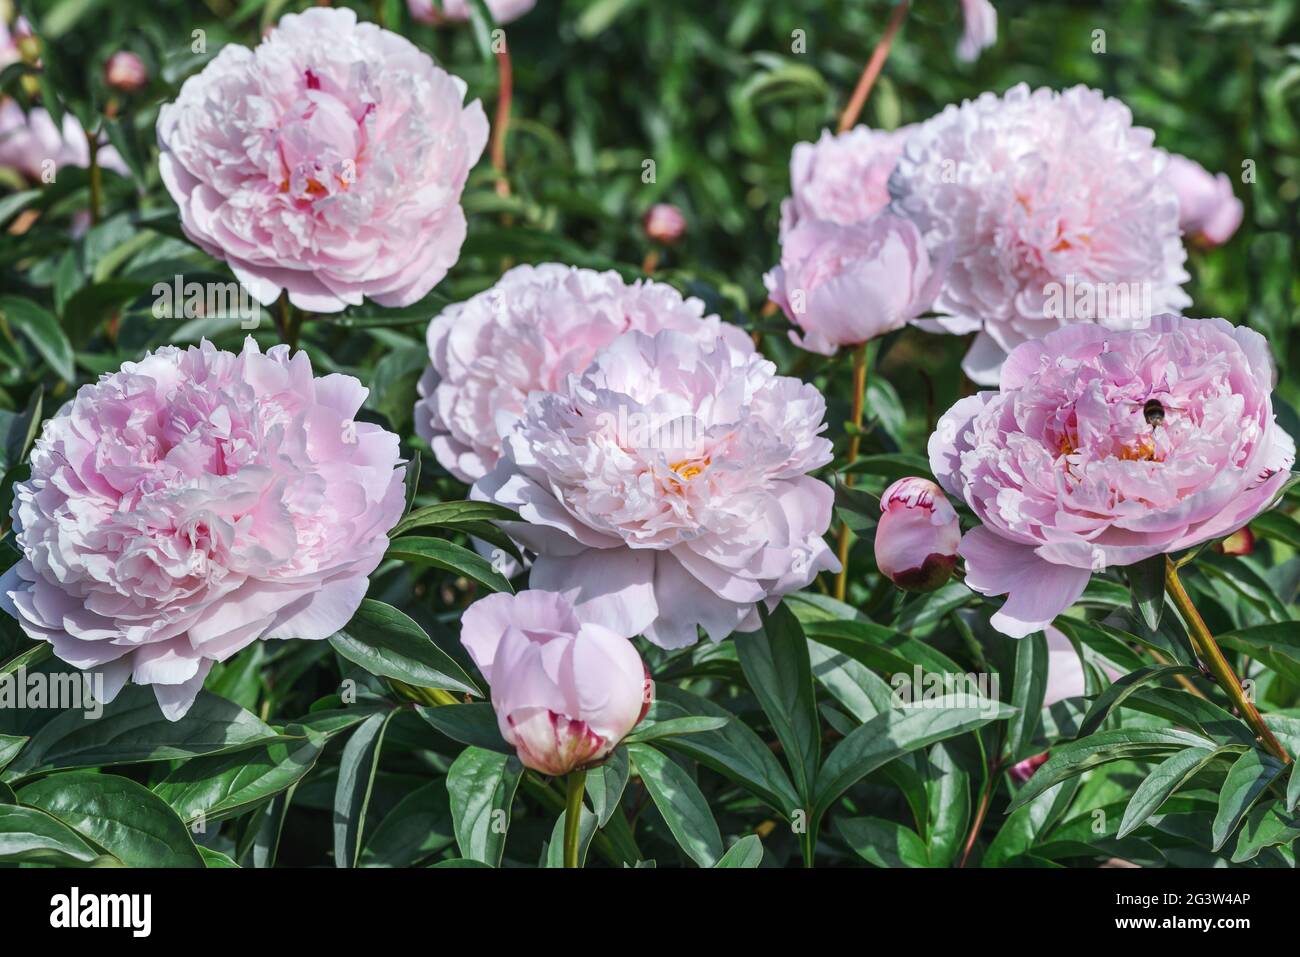 Blush Queen peony is milky-flowered with giant double-shaped flowers. They are creamy white with delicate light pink hues. Stock Photo